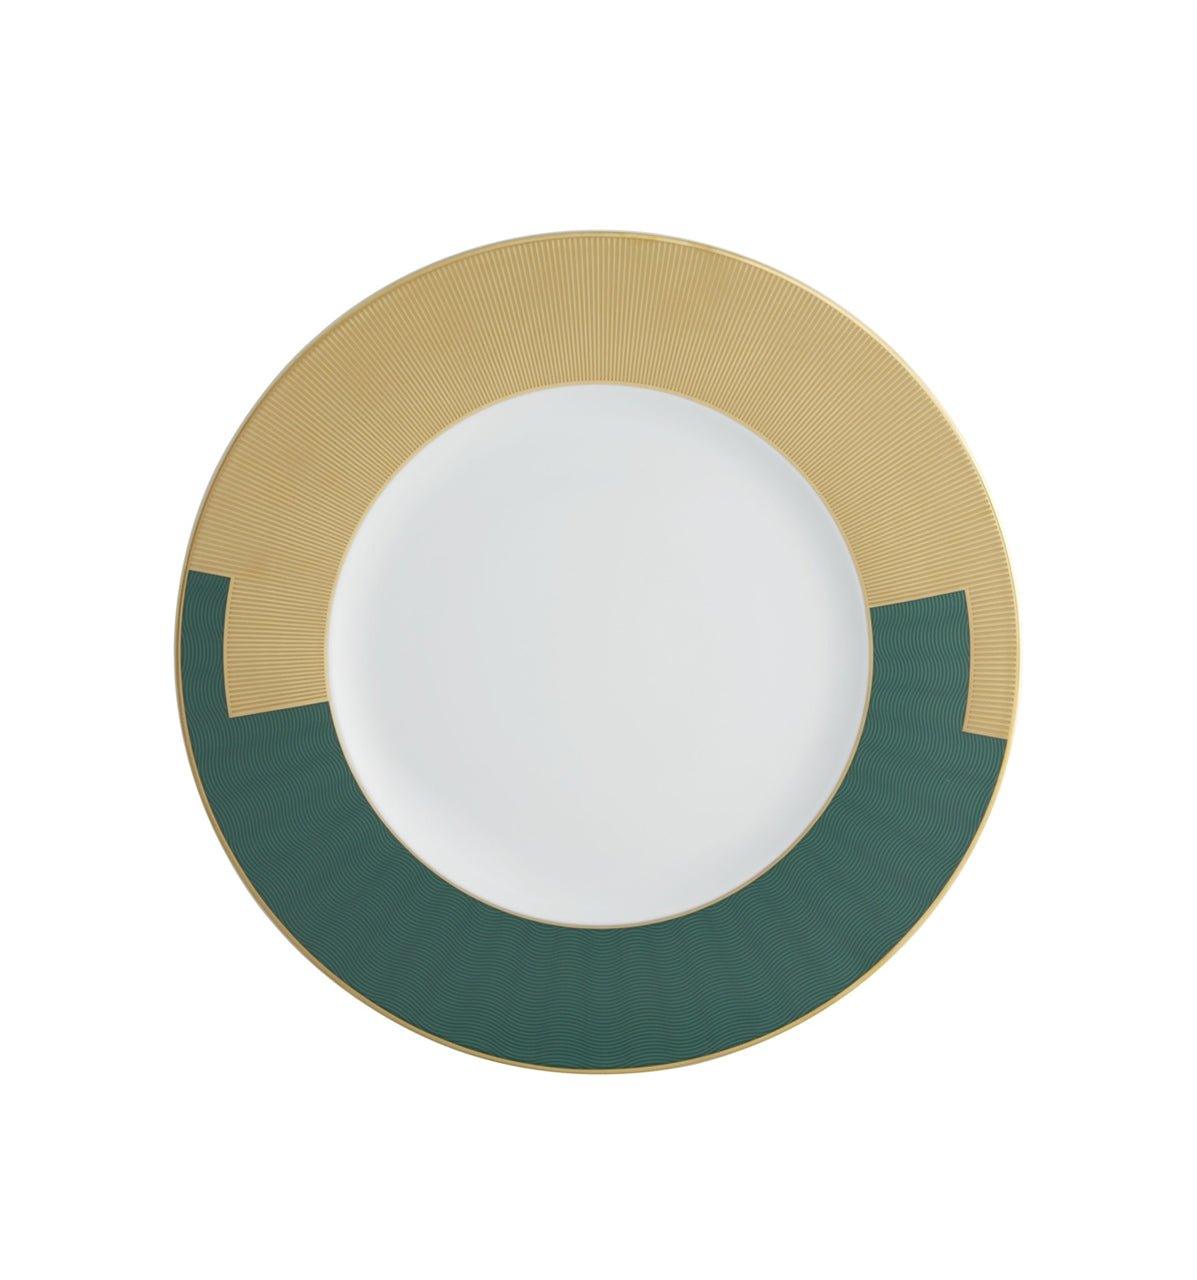 Emerald - Charger Plate (4 plates) - LAZADO